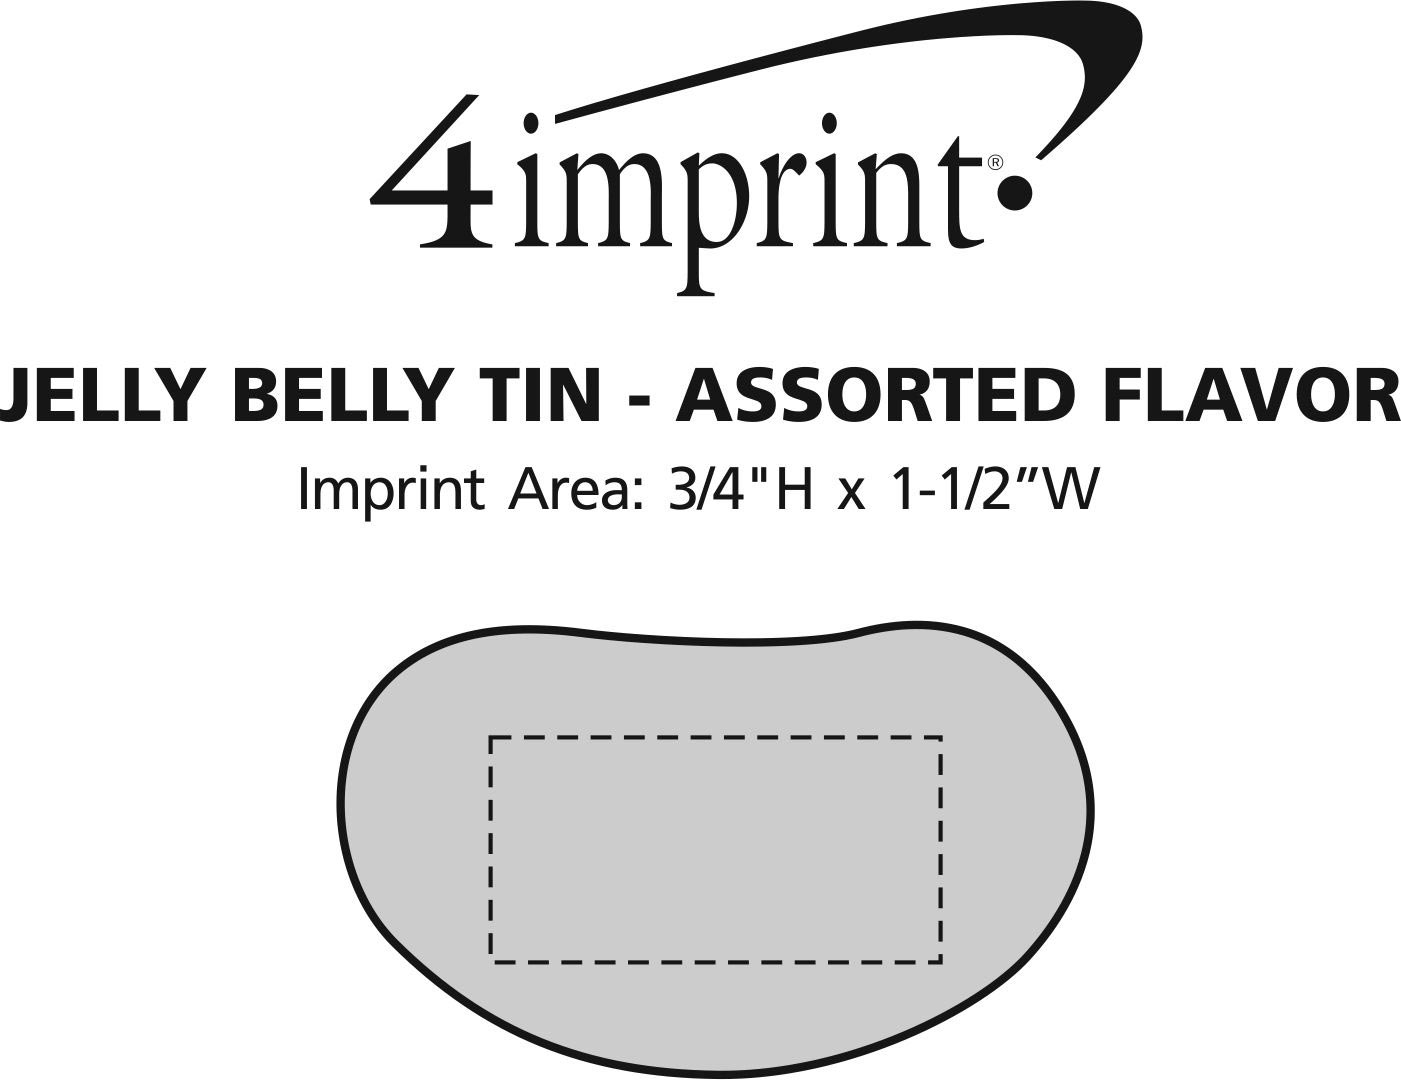 Imprint Area of Jelly Belly Tin - Assorted Flavor